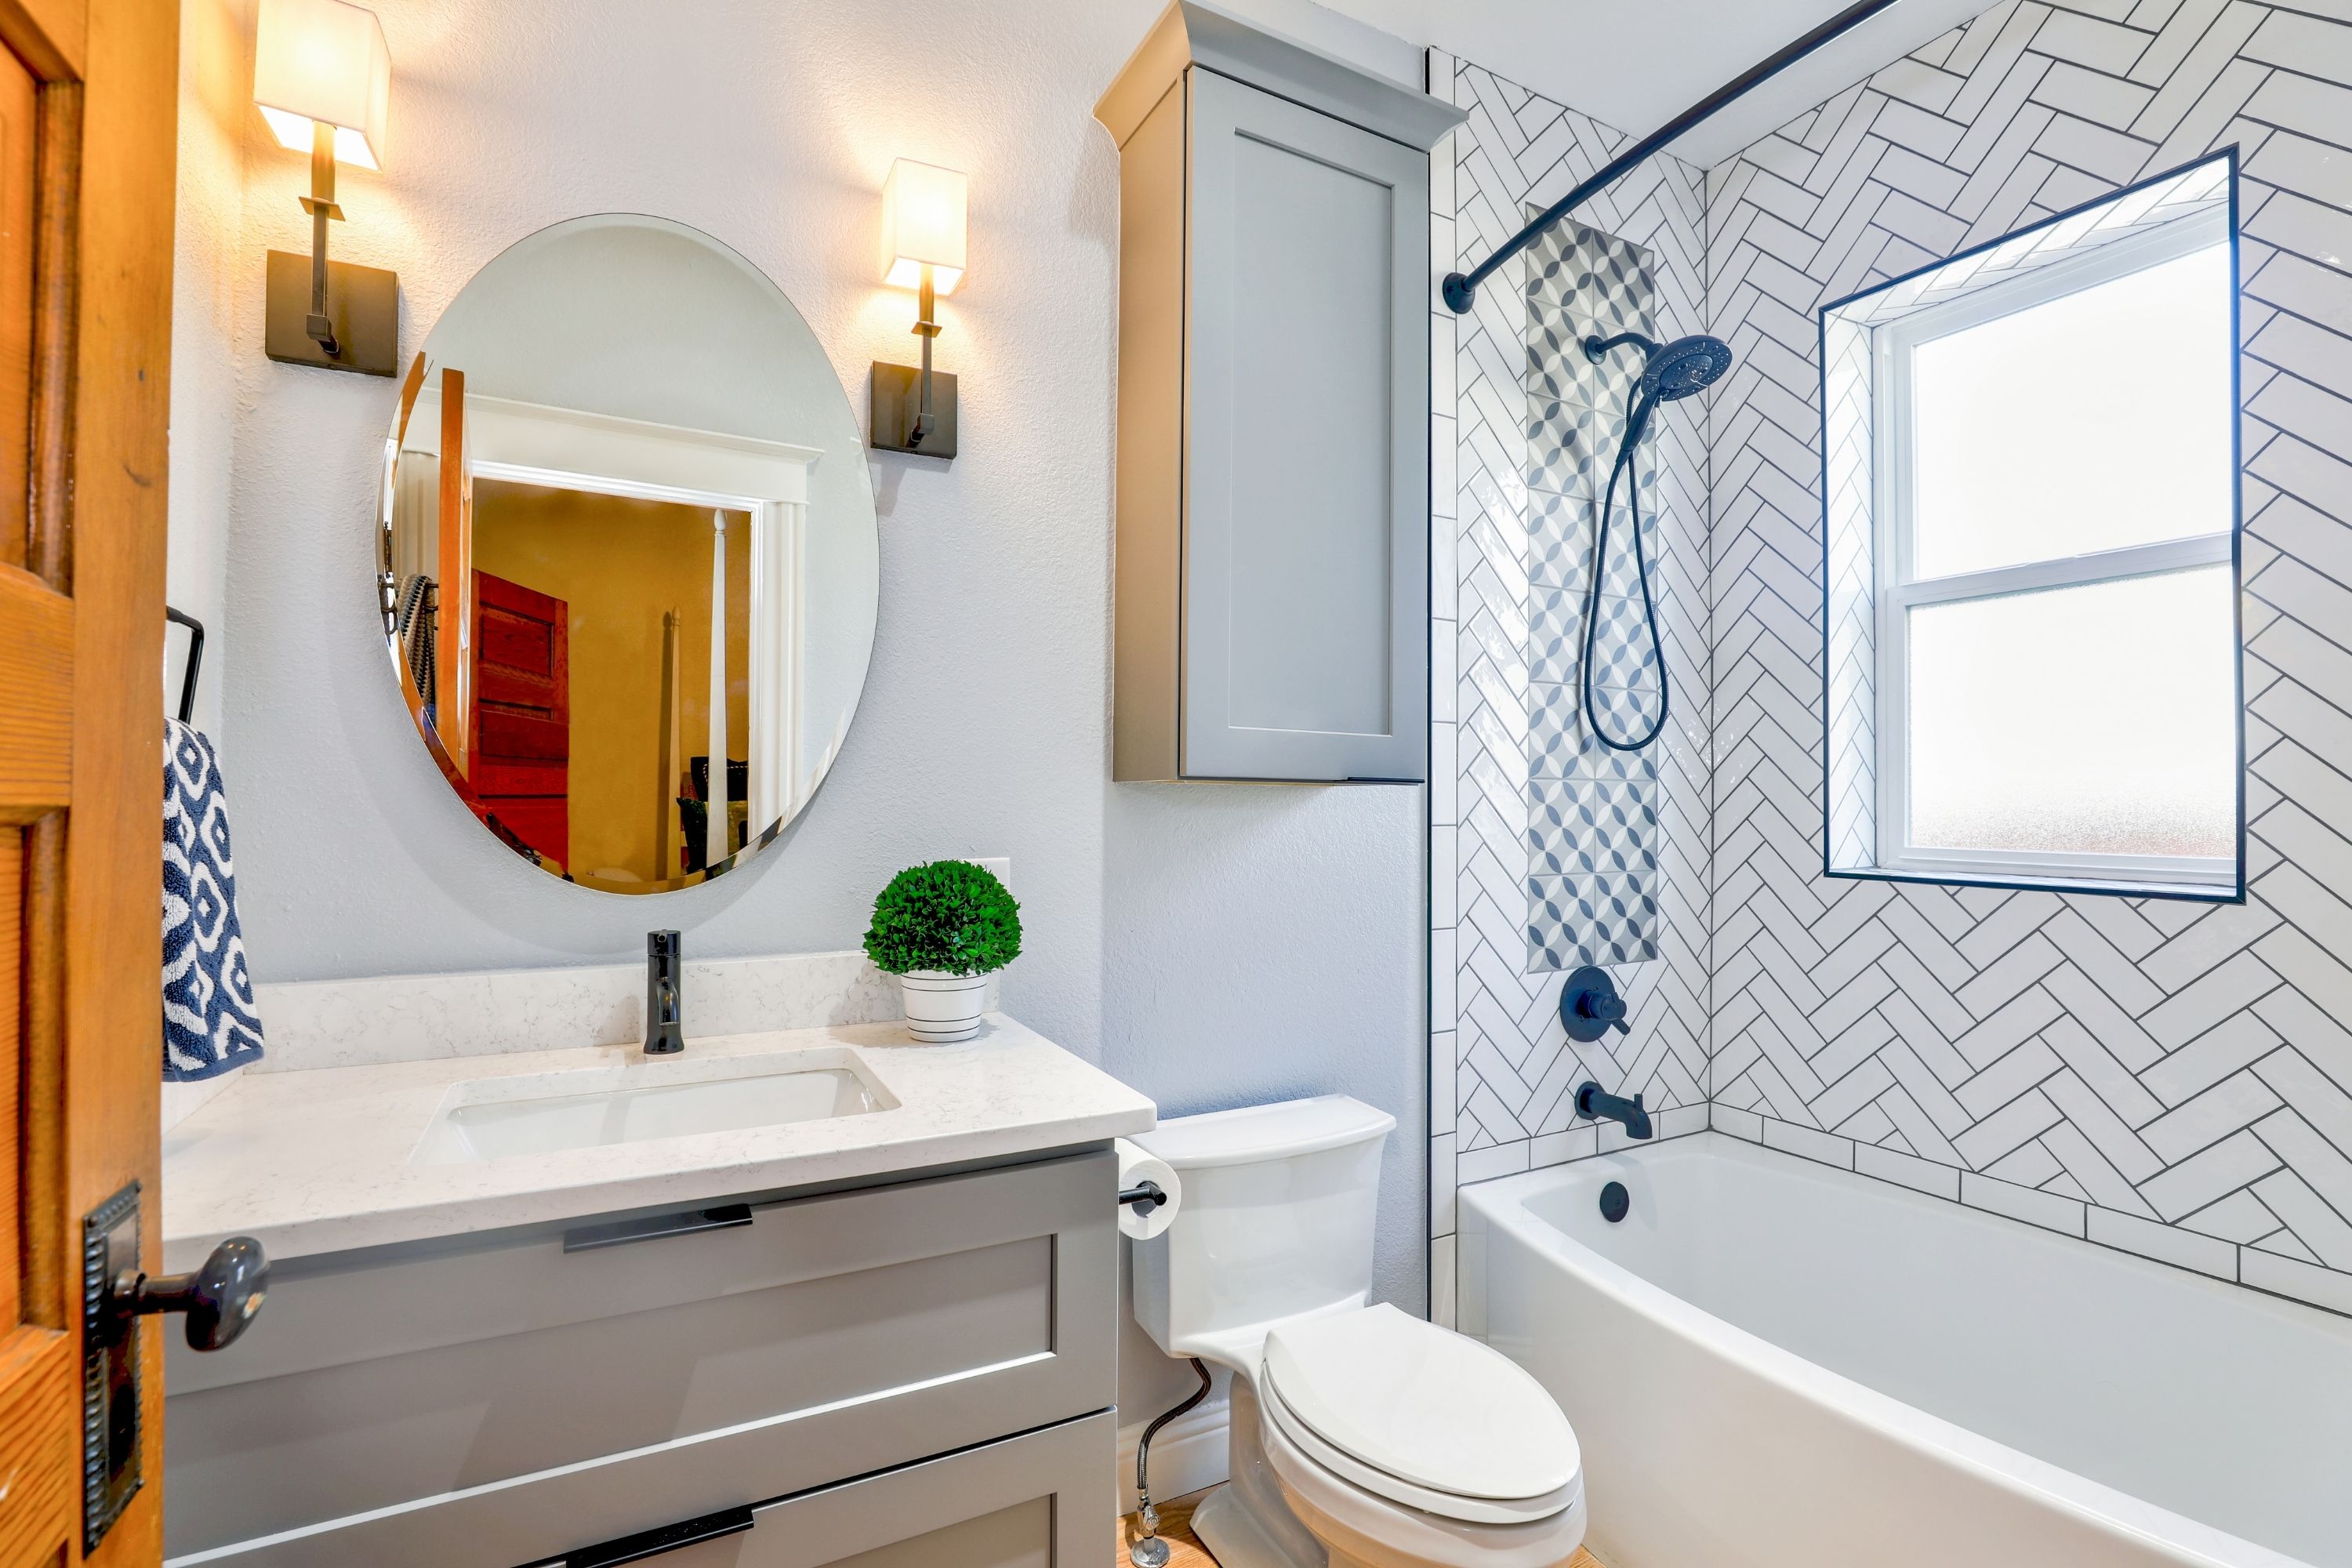 Modern guest bathroom – design ideas for practical and functional space